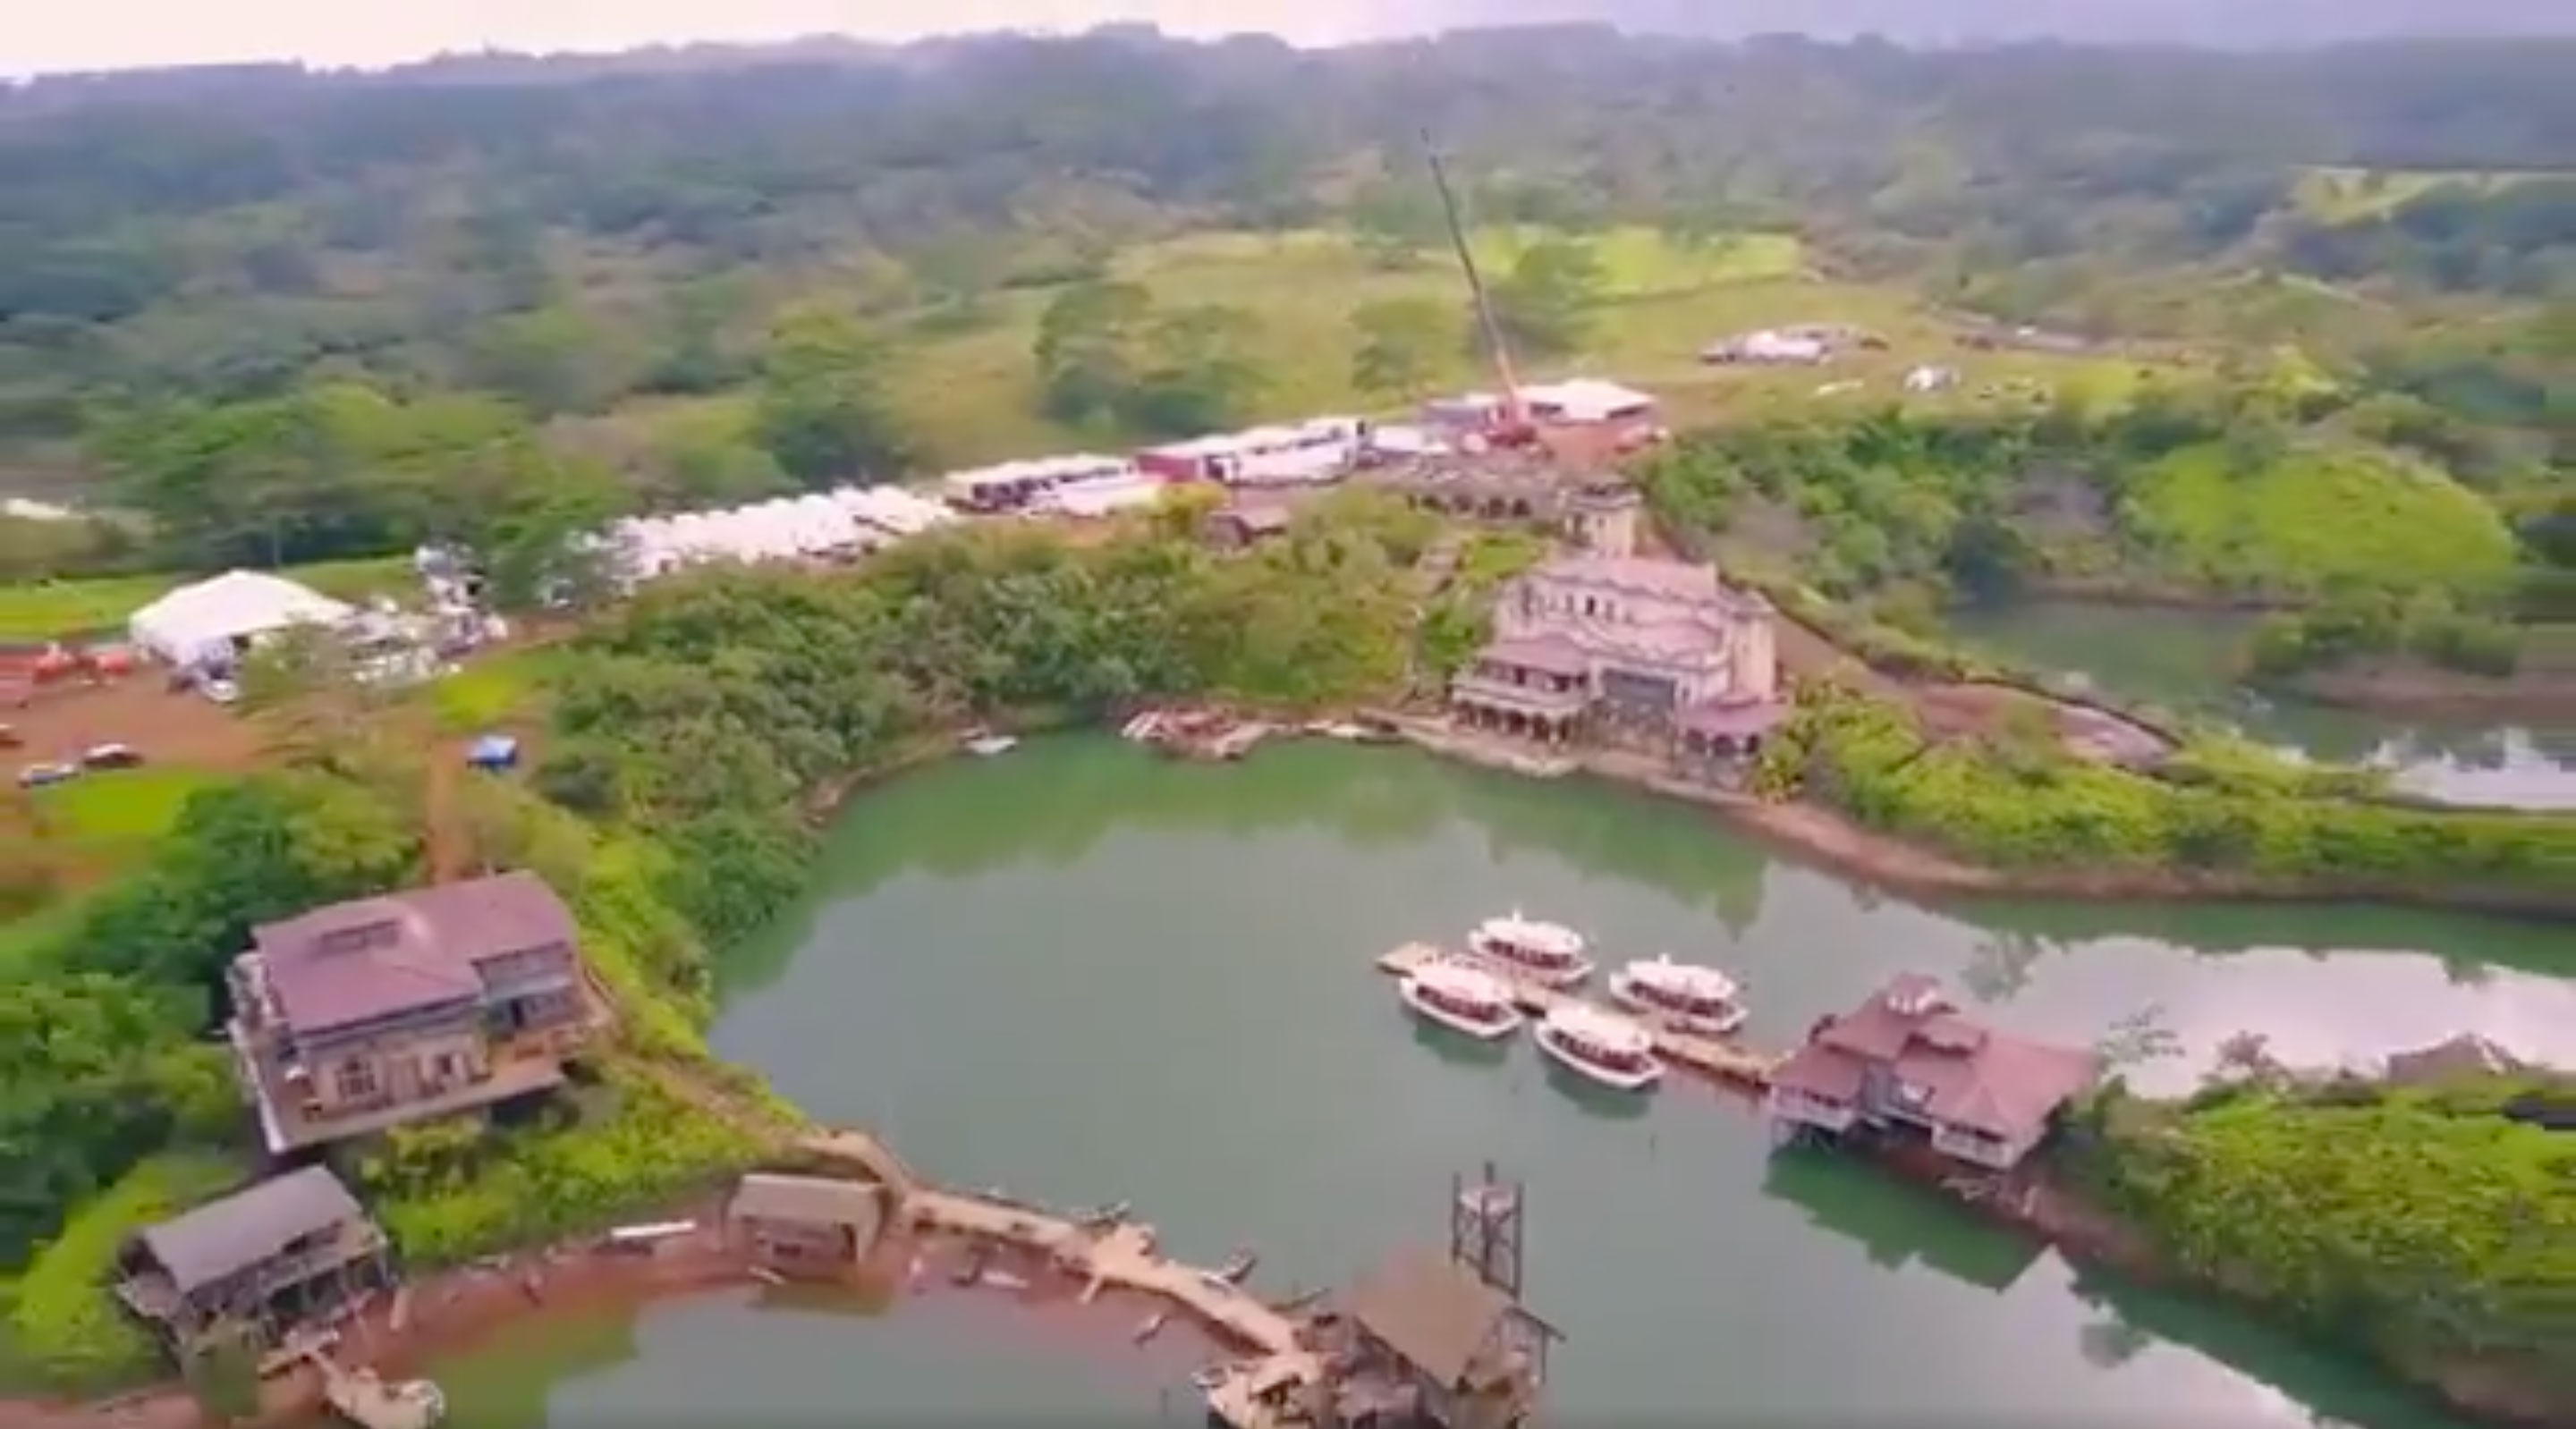 Disney Showcases Huge Jungle Cruise Set in This New Video With Dwayne ‘The Rock’ Johnson